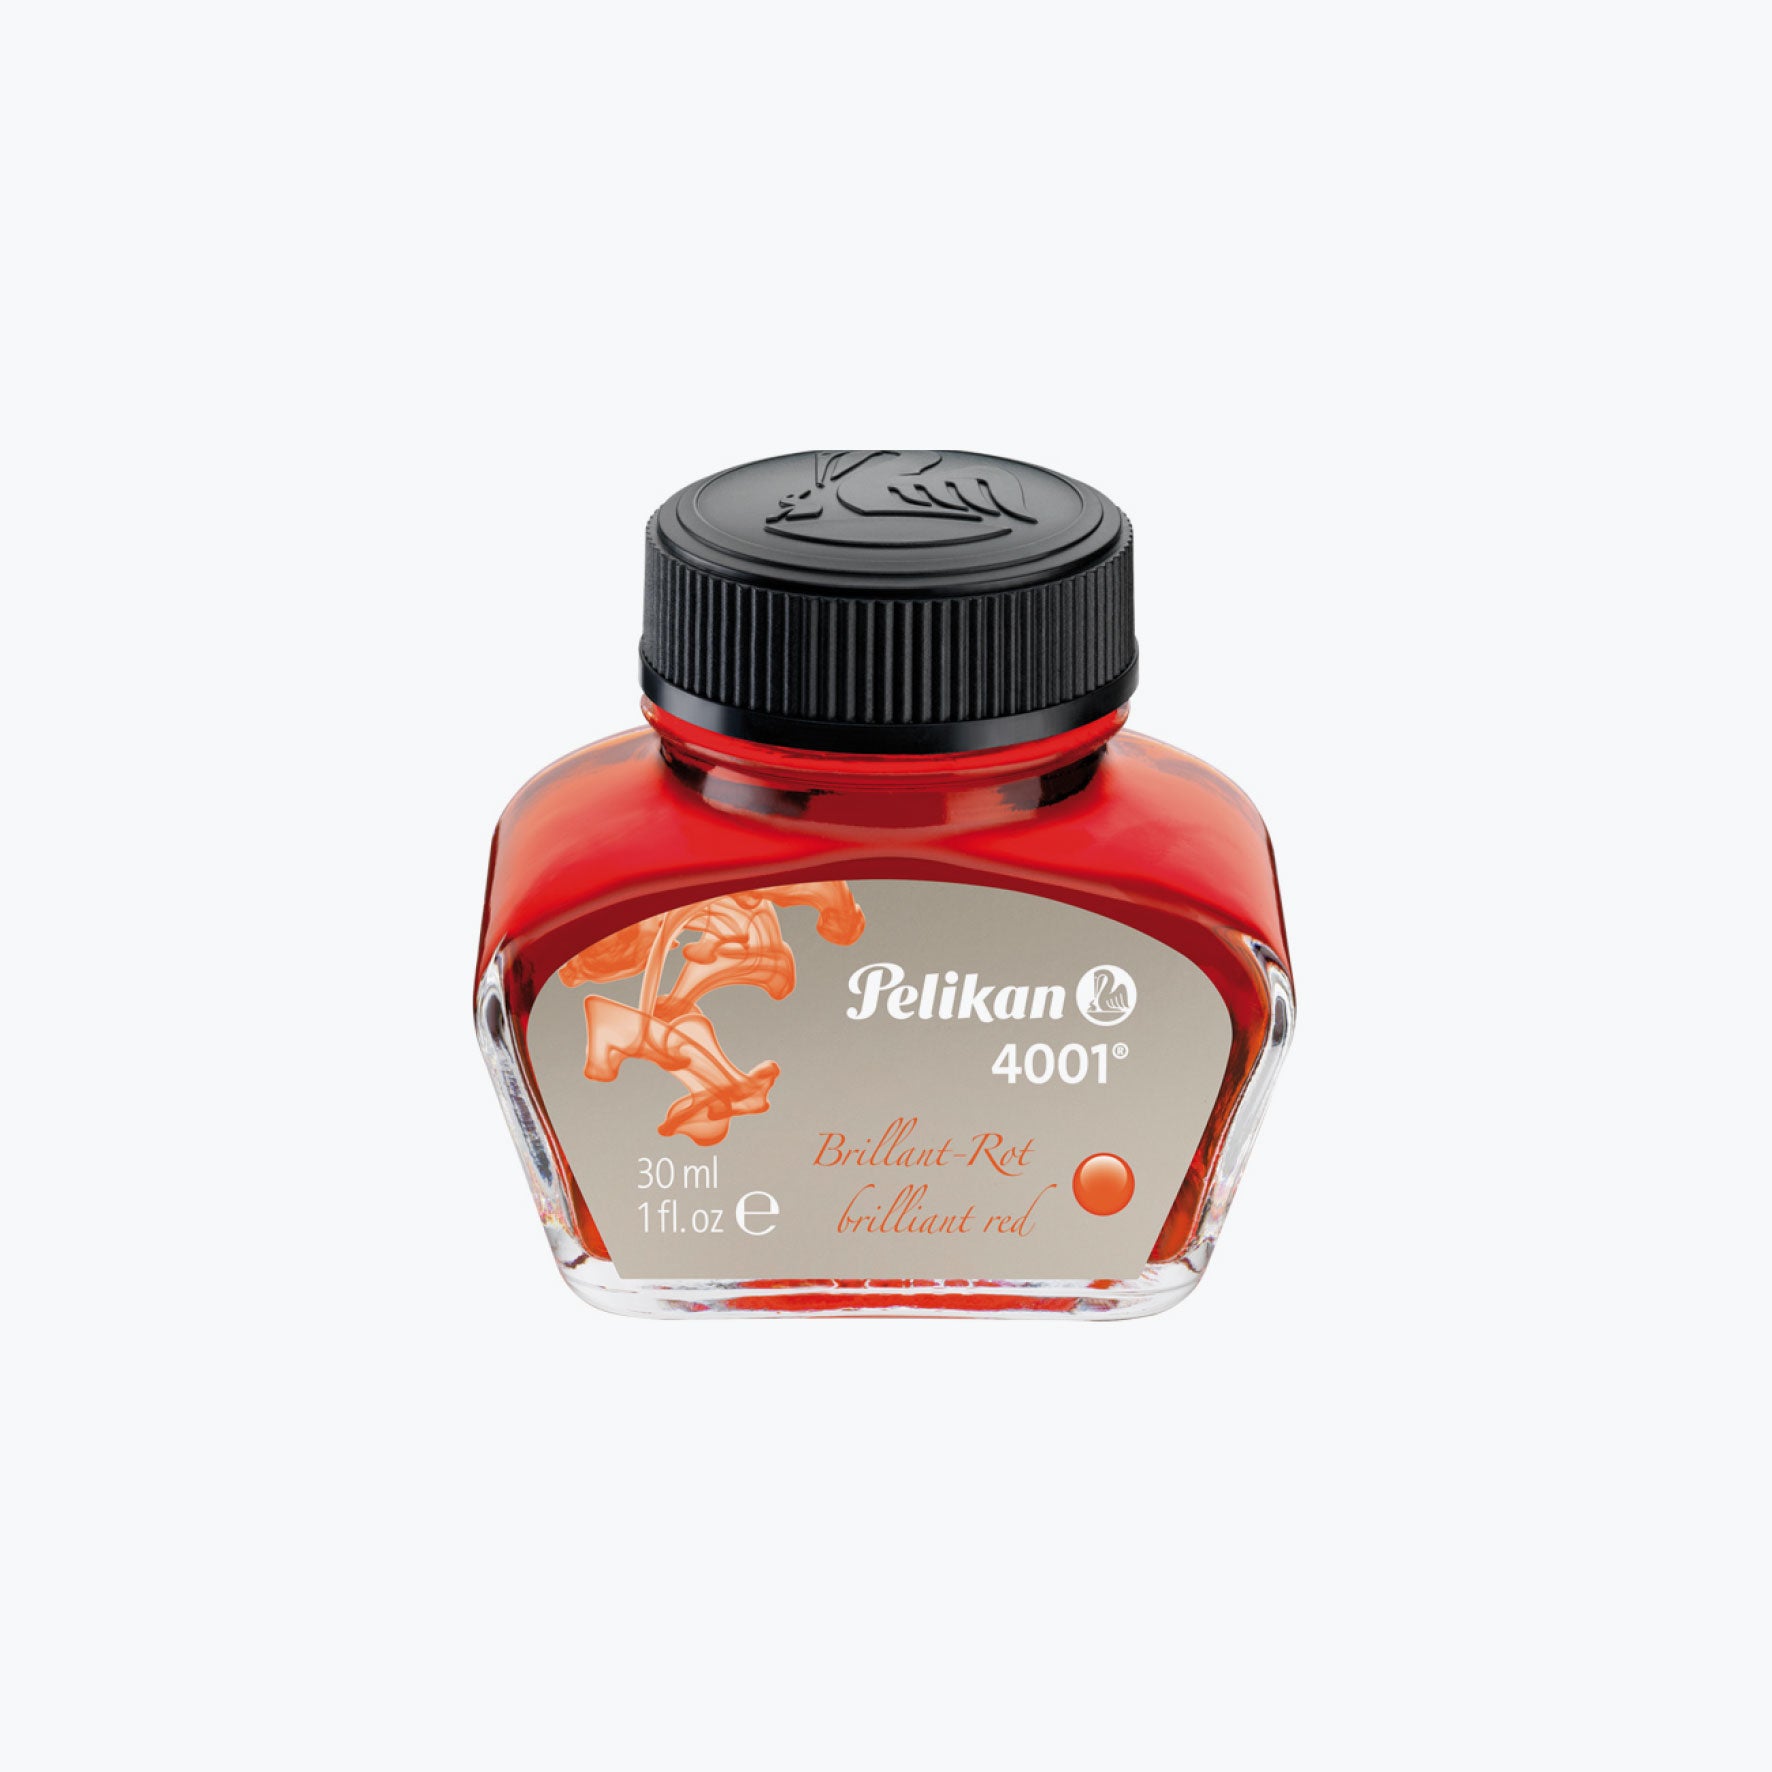 Pelikan - 4001 Ink (30ml) - Brilliant Red <Outgoing>